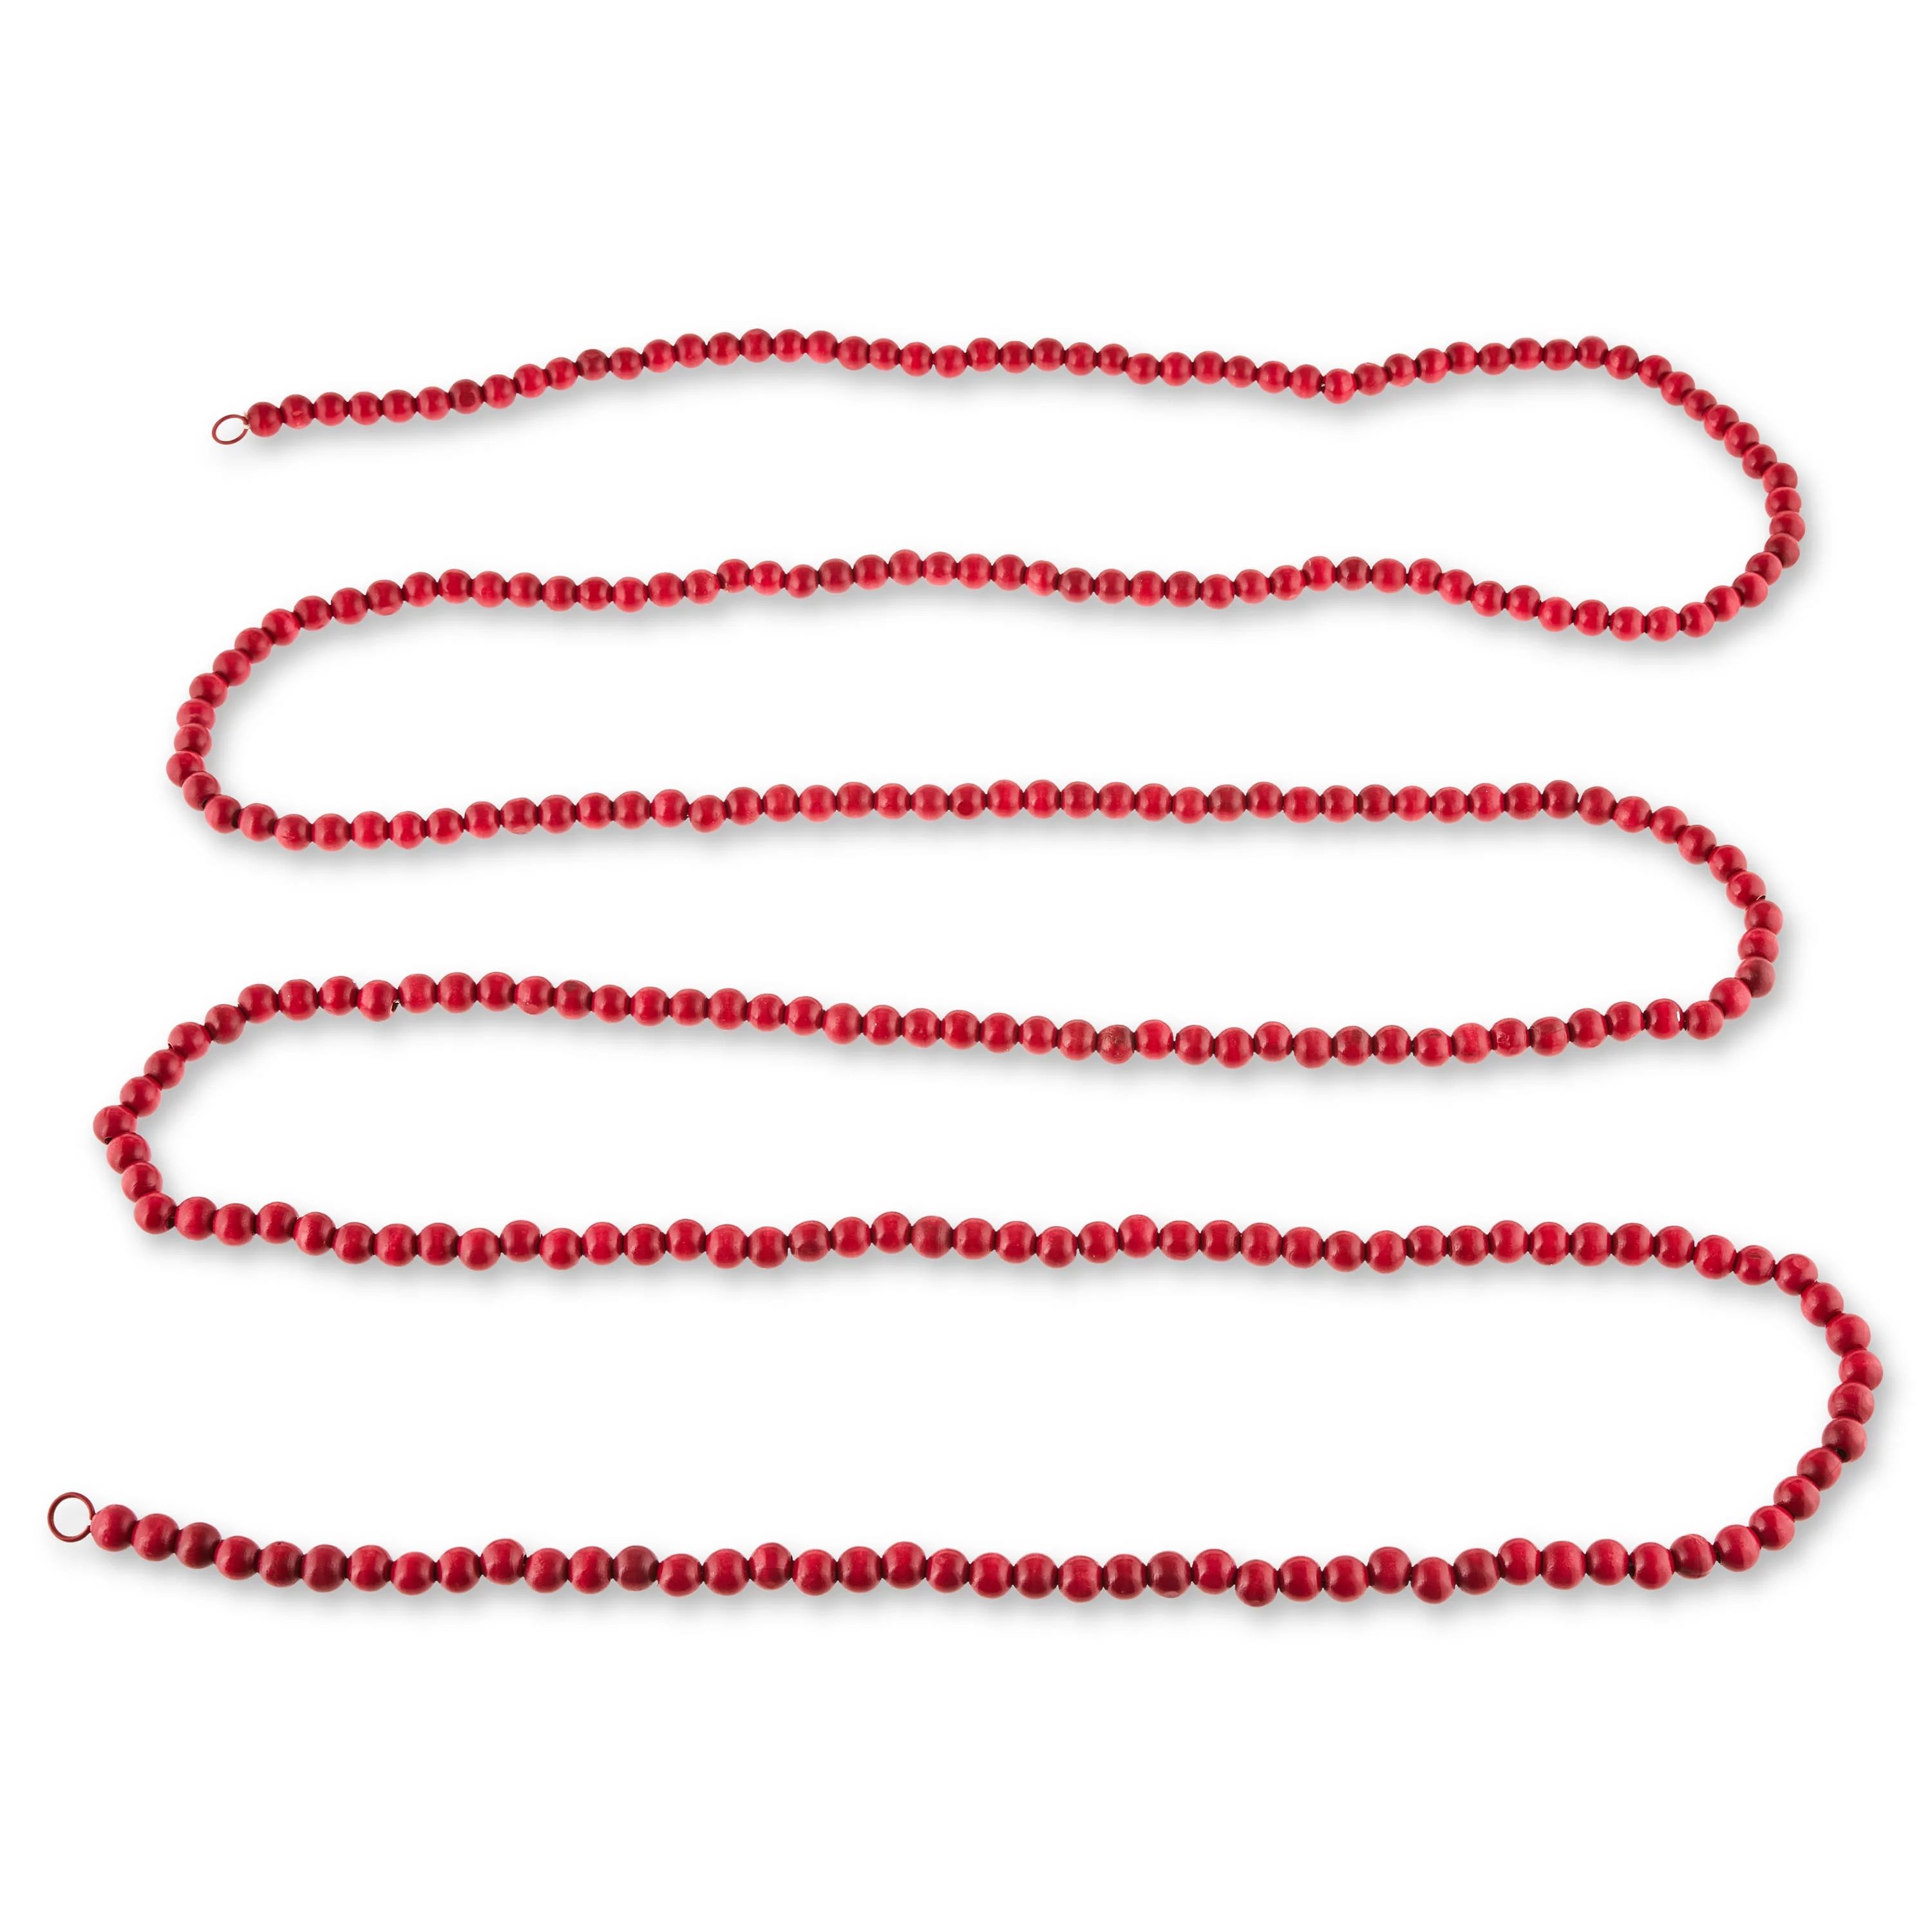 Red and Natural Decorative 14mm Wood Bead Garland,12 ft, by Holiday Time | Walmart (US)